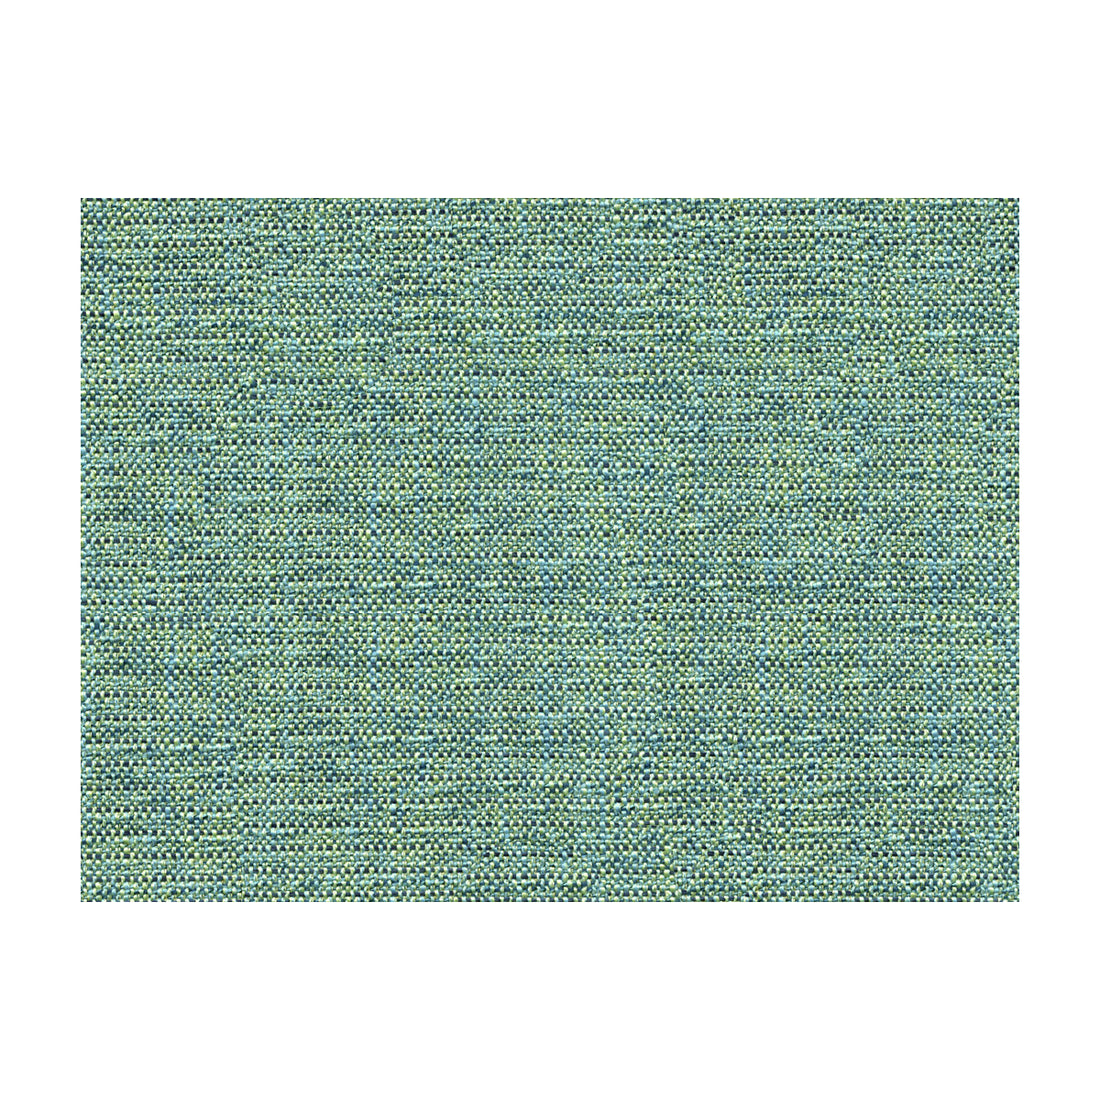 Rafael fabric in pool color - pattern 33788.515.0 - by Kravet Basics in the Jonathan Adler Charade collection